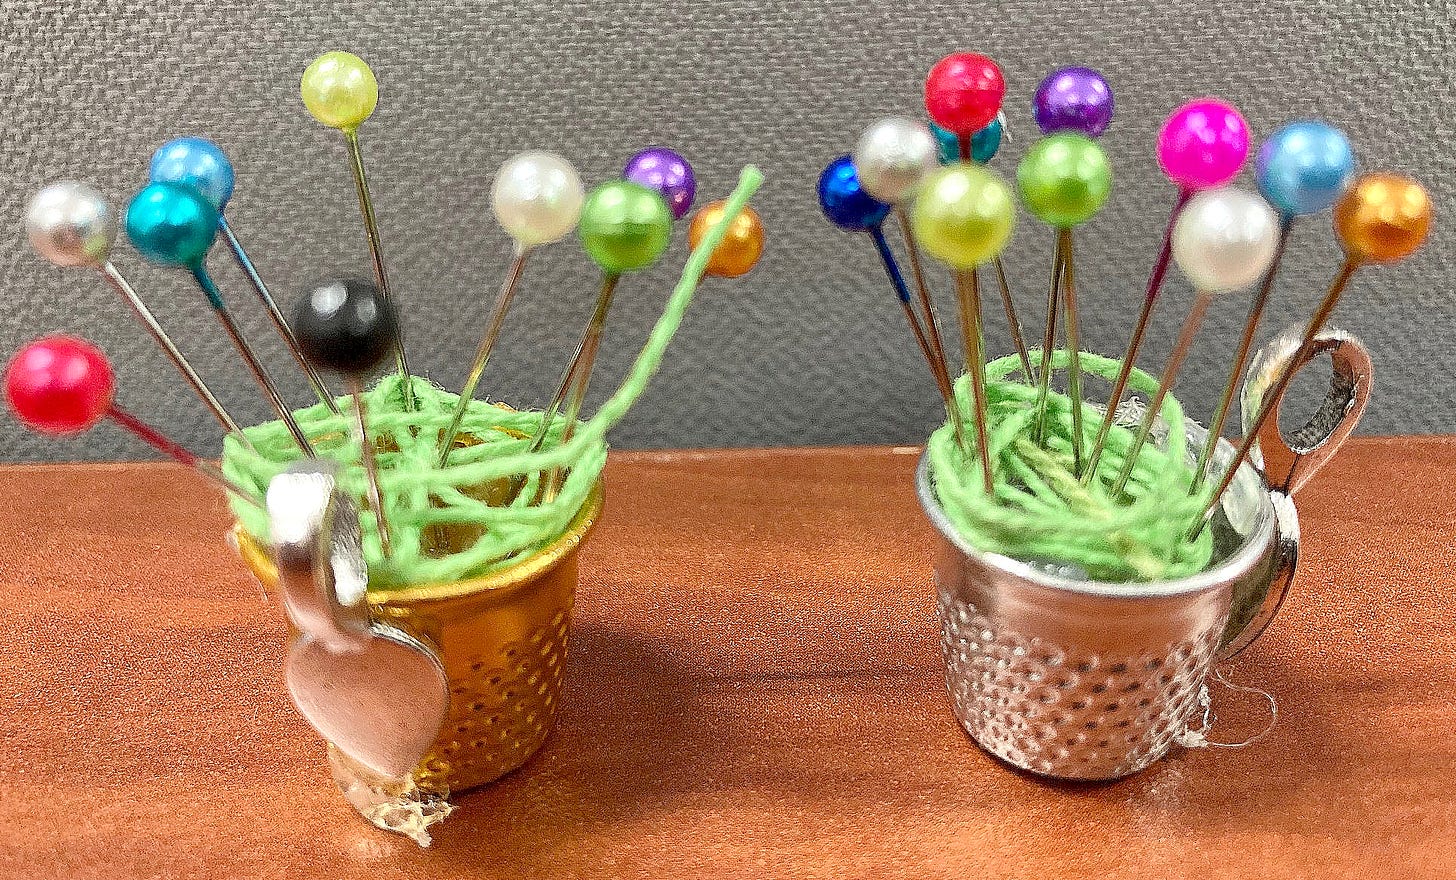 The Marathon County Public Library's Wausau location is featuring grab-and-go crafting kids to make thimble bouquet pendants over this January and the release was featured in The Wausau Sentinel.